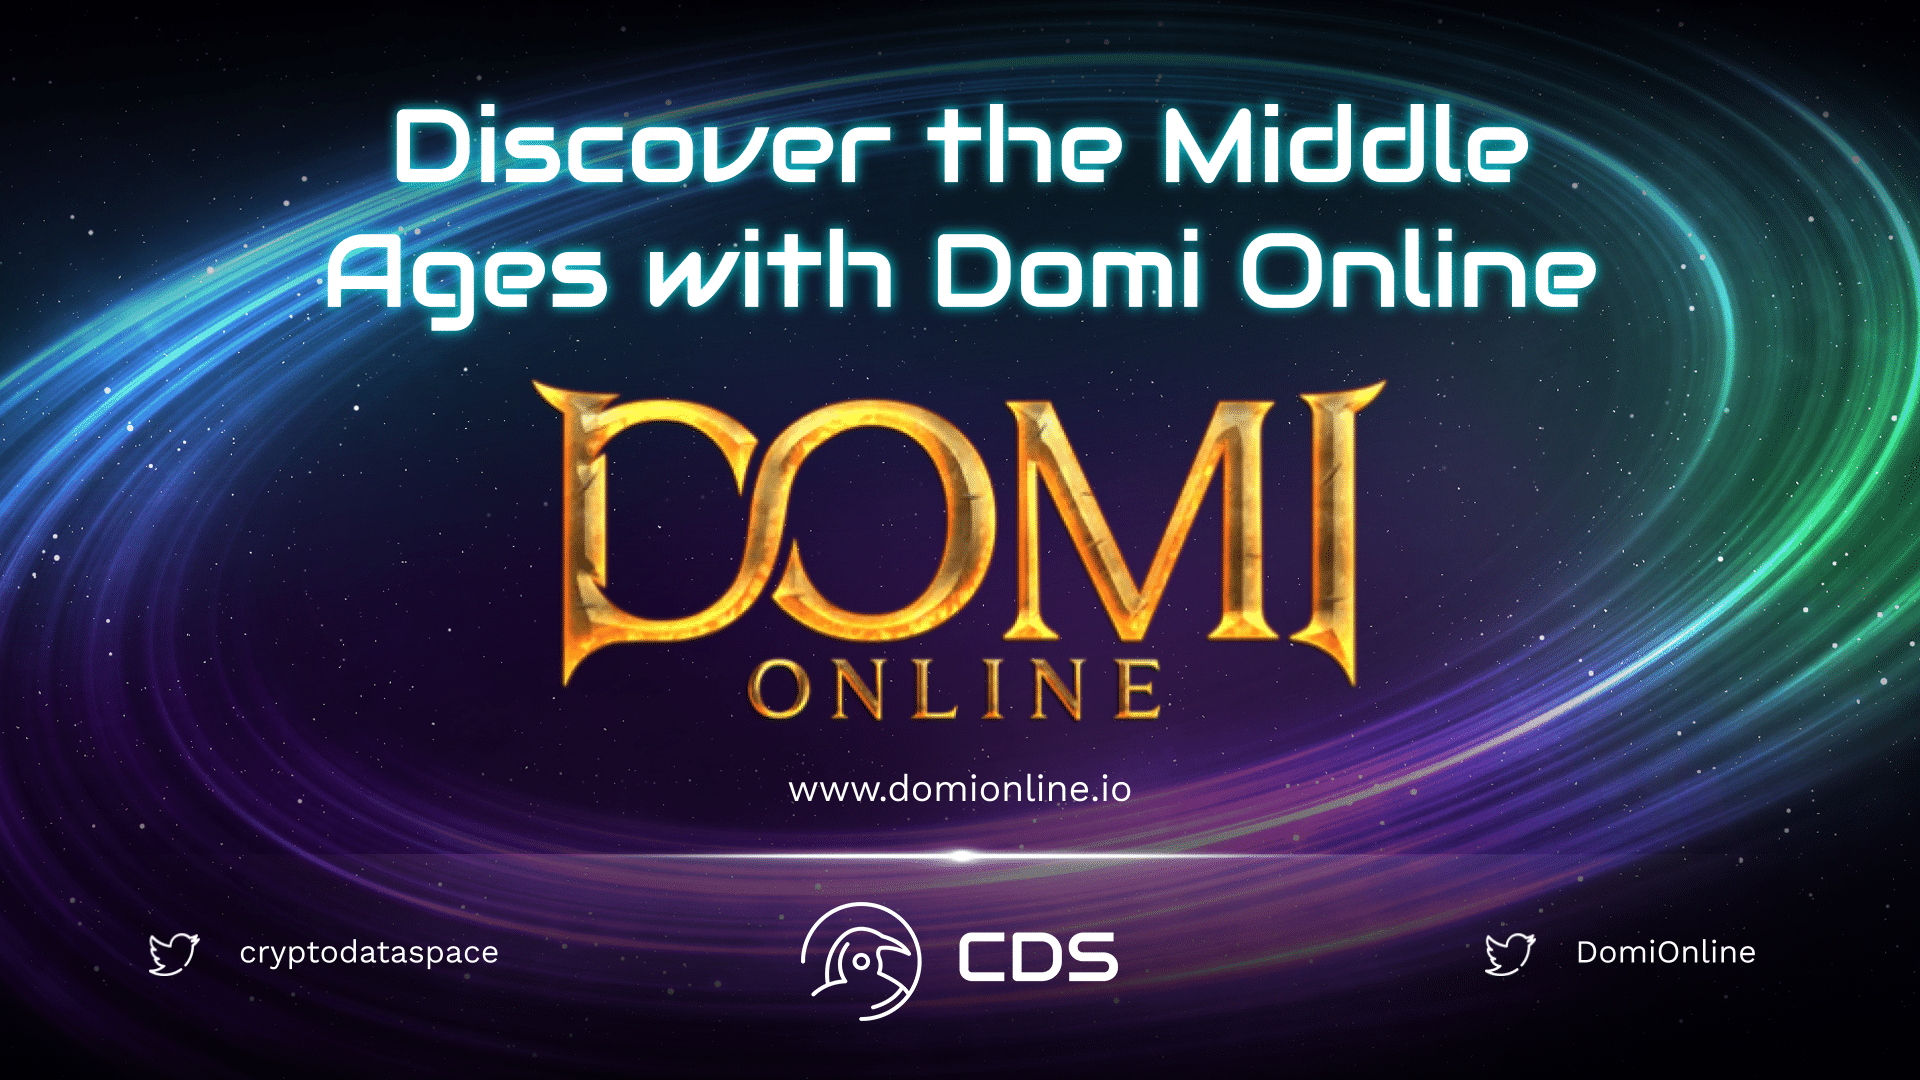 Discover the Middle Ages with Domi Online